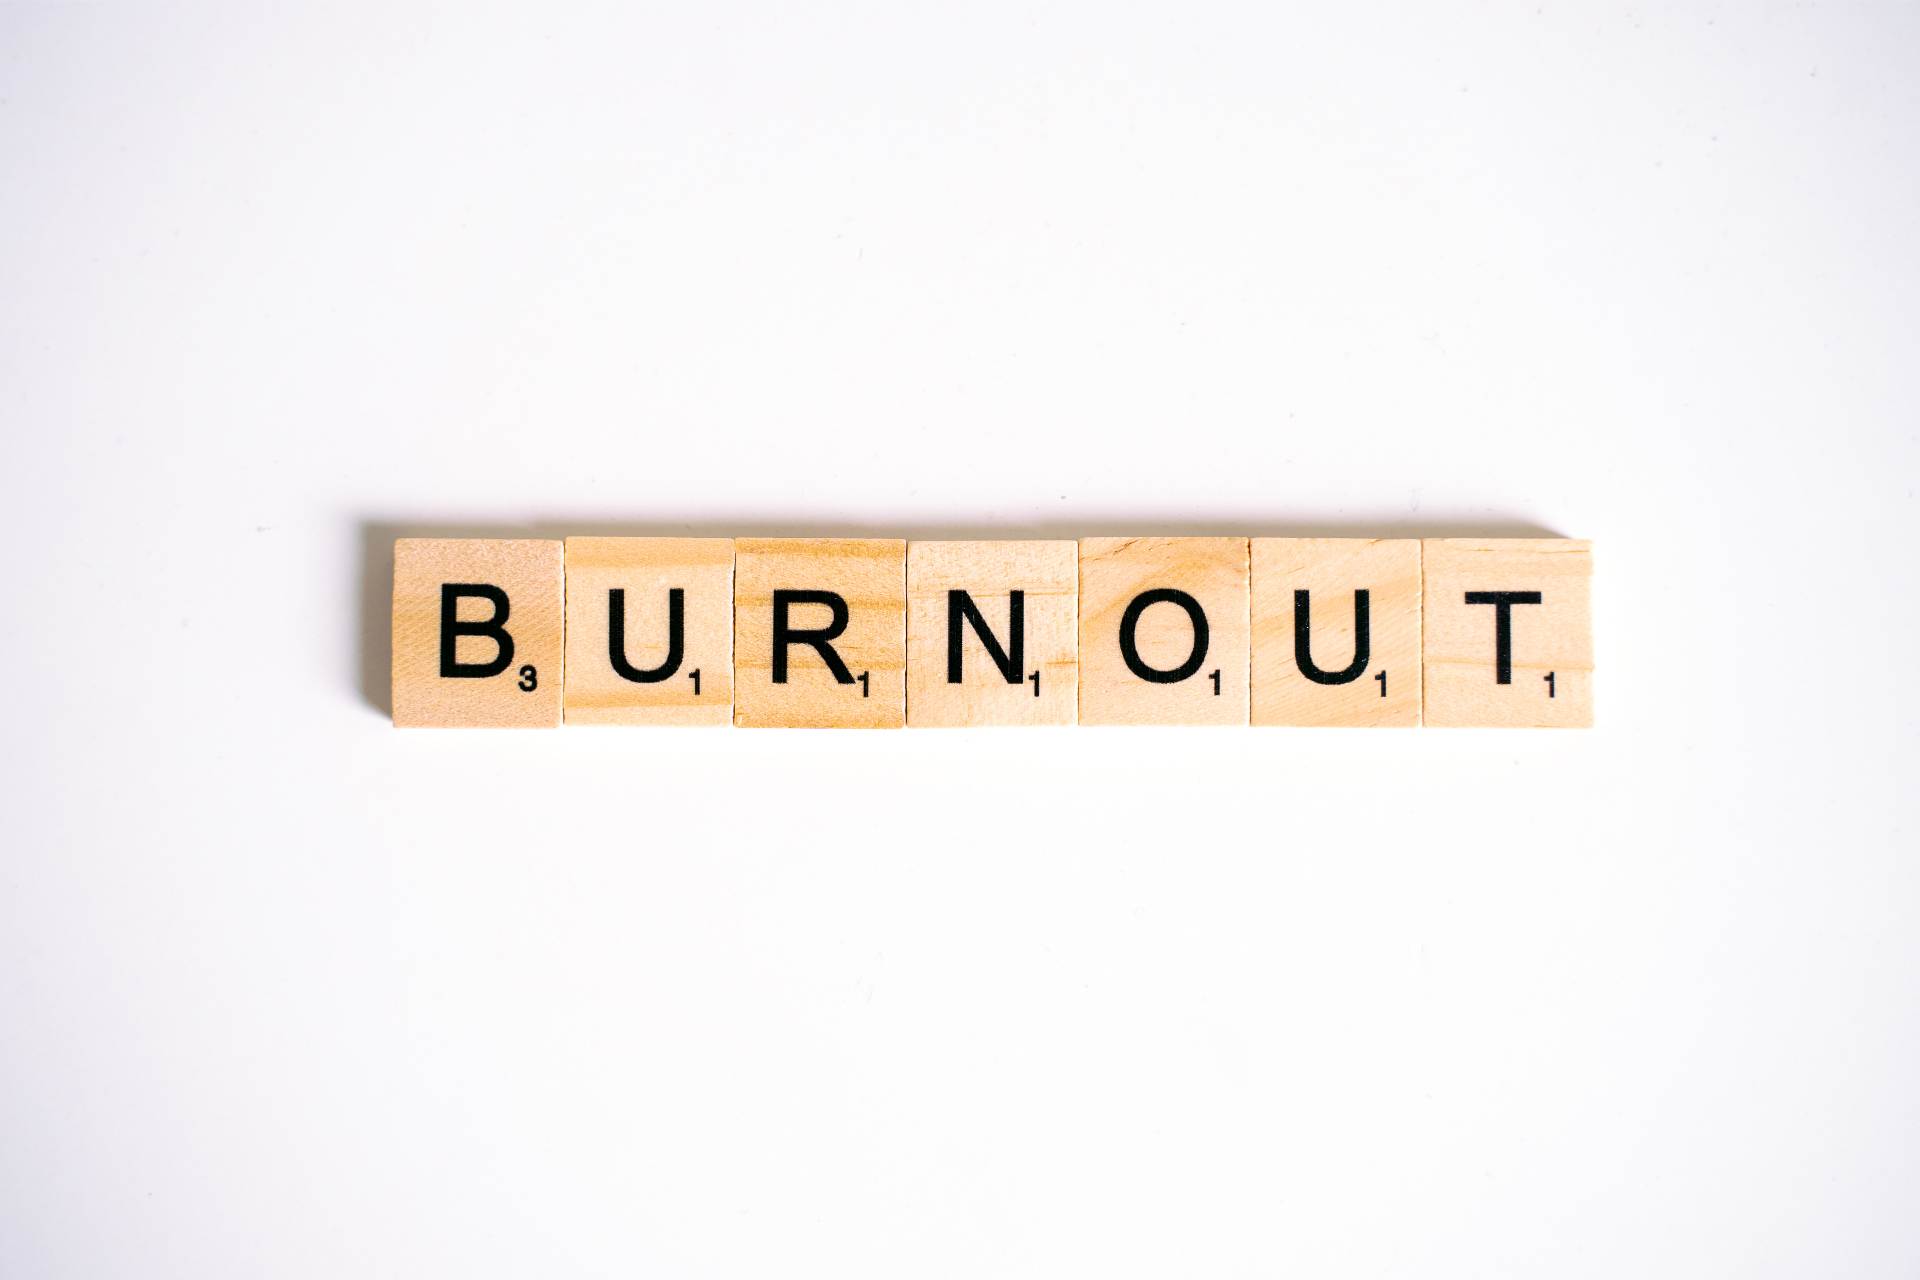 Are you feeling burnt out?